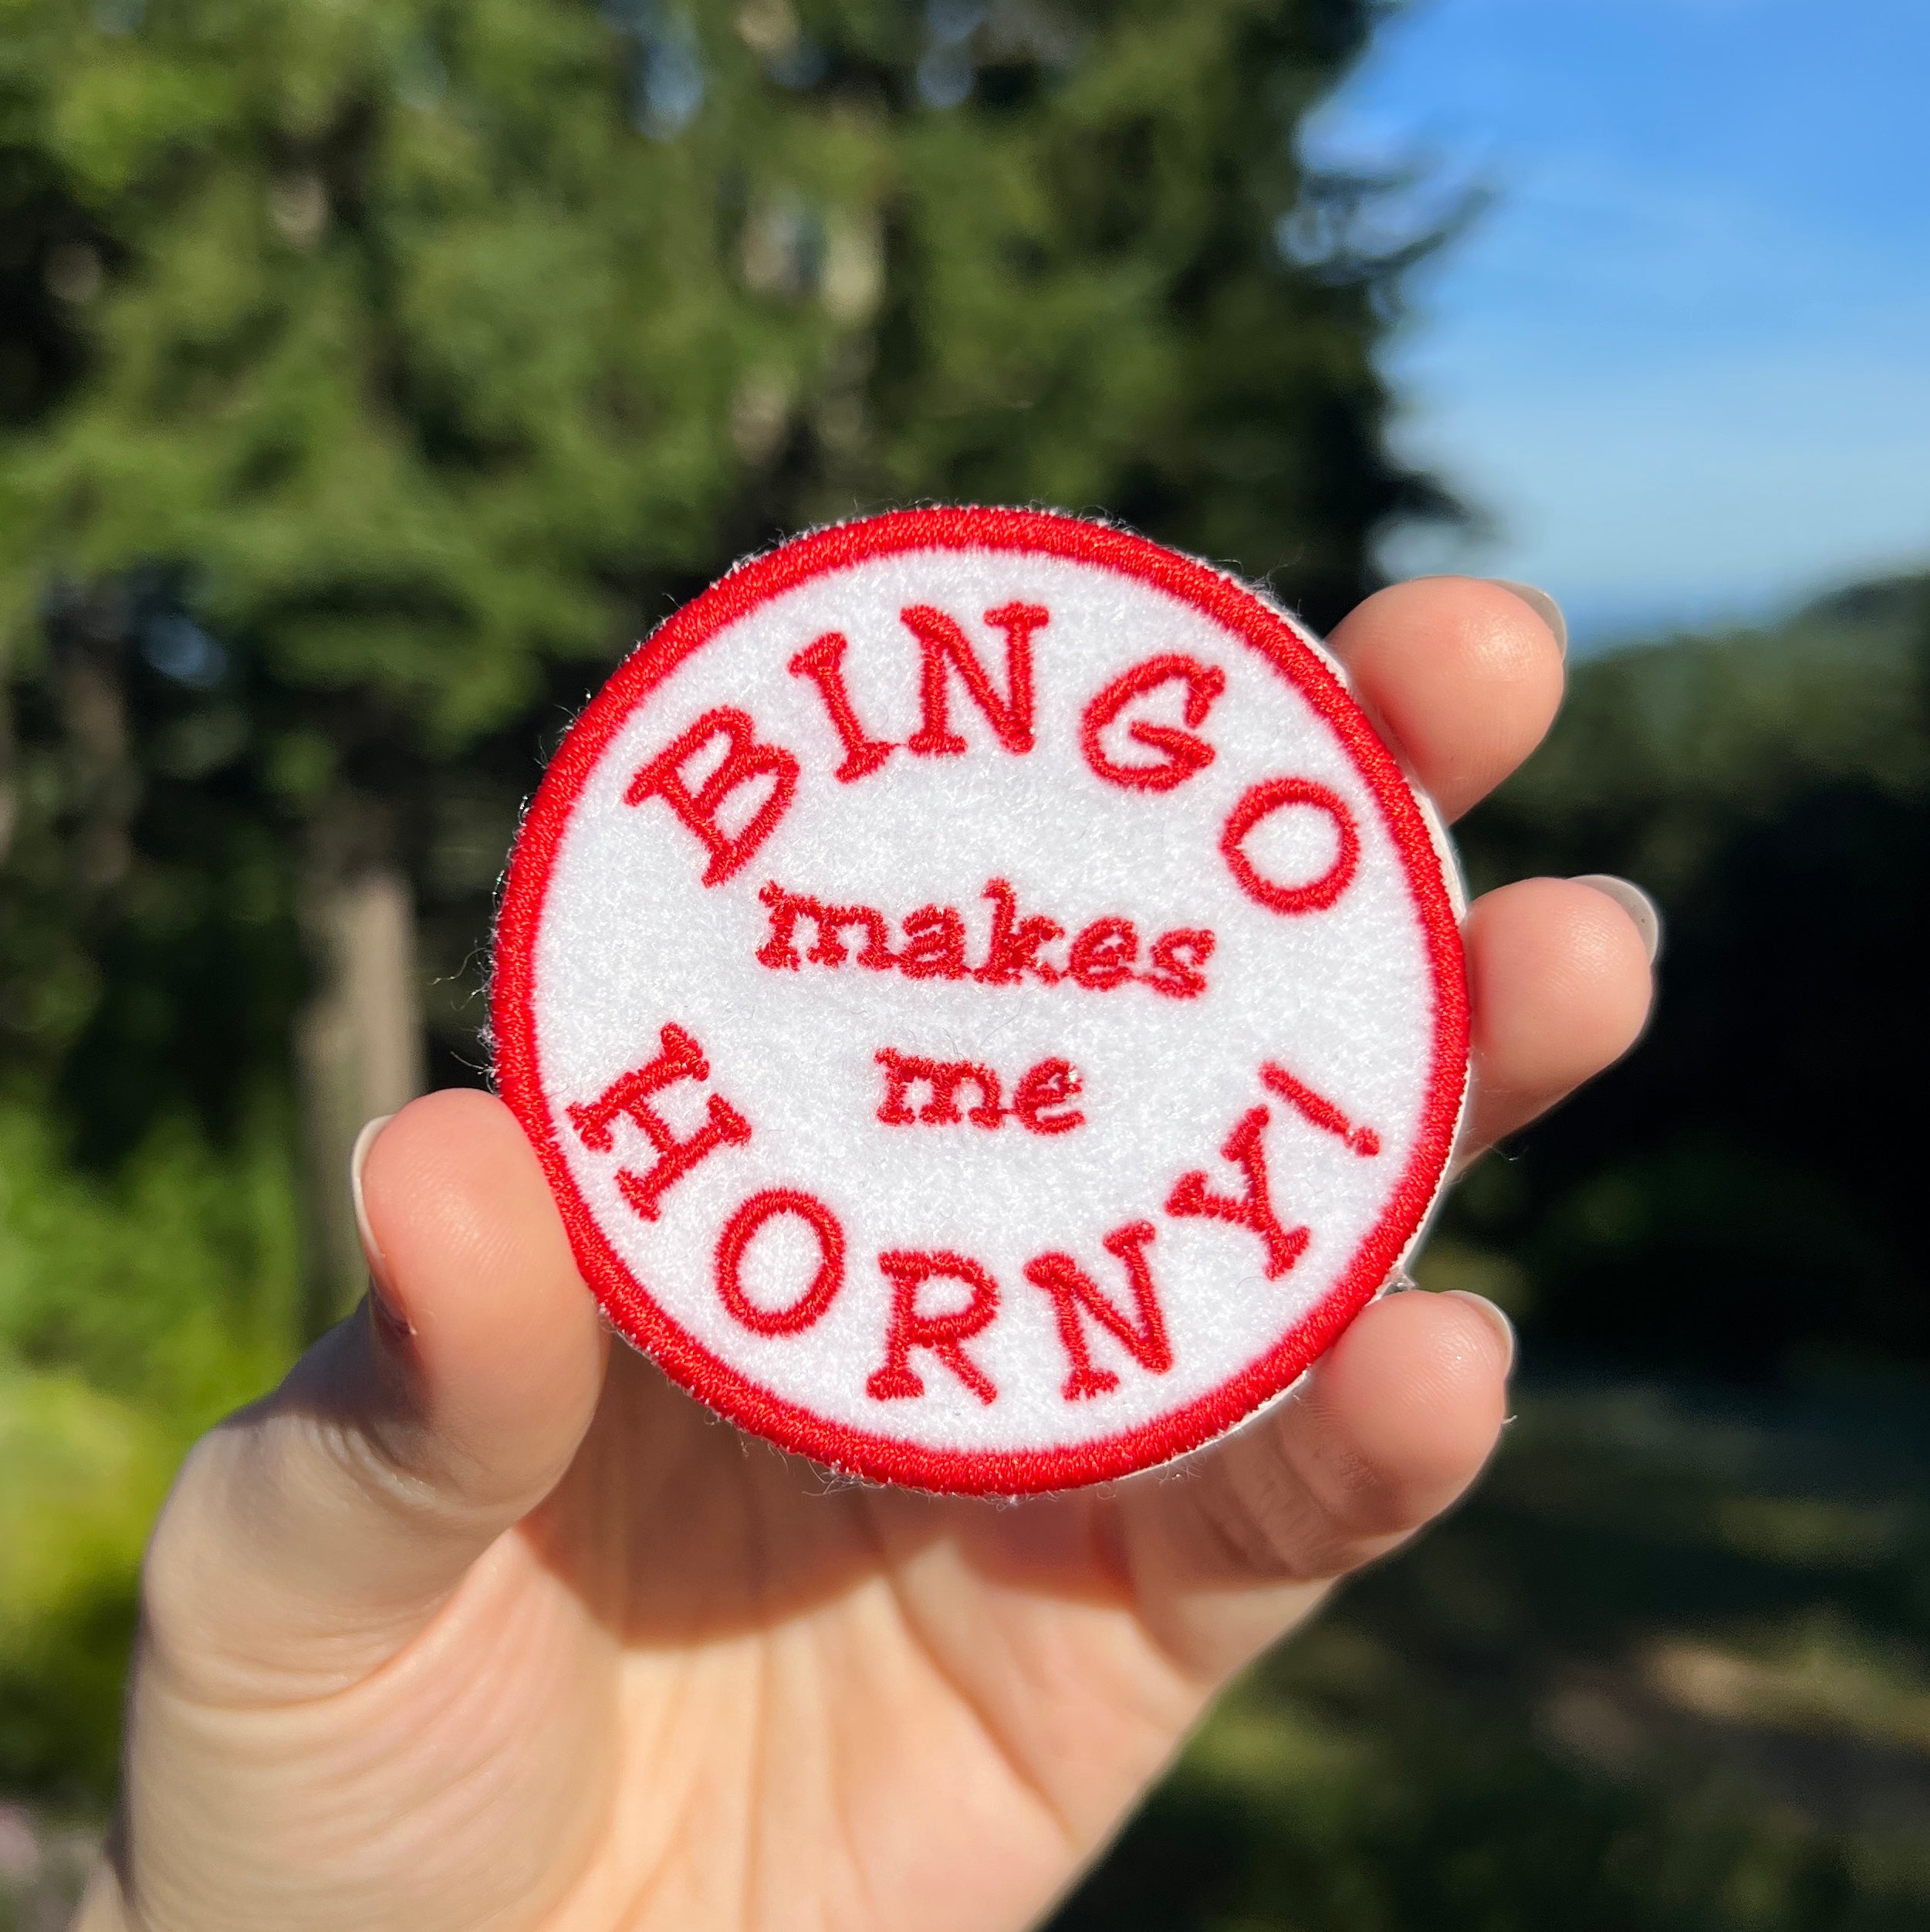 Bingo Makes Me Horny Embroidered Iron-On Patch